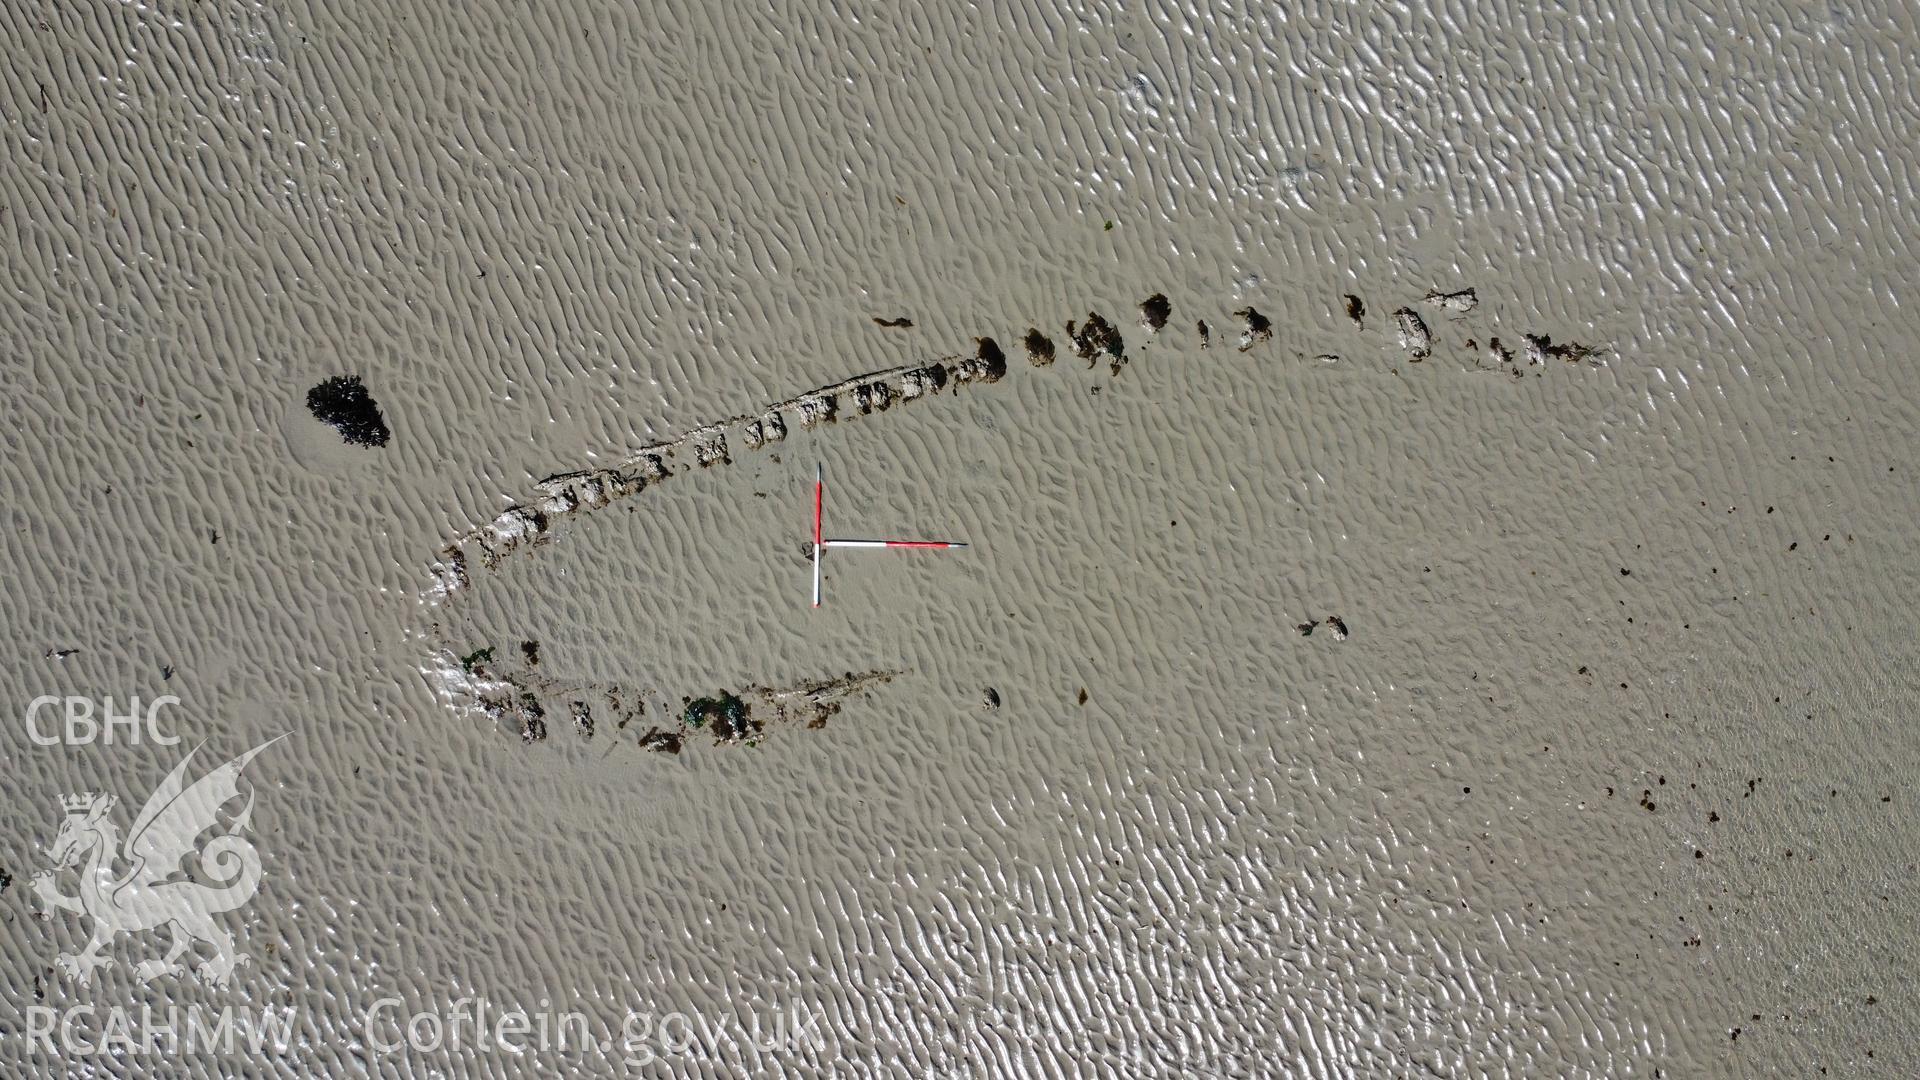 Overhead view of Goodwick Wreck 2, north towards the top.